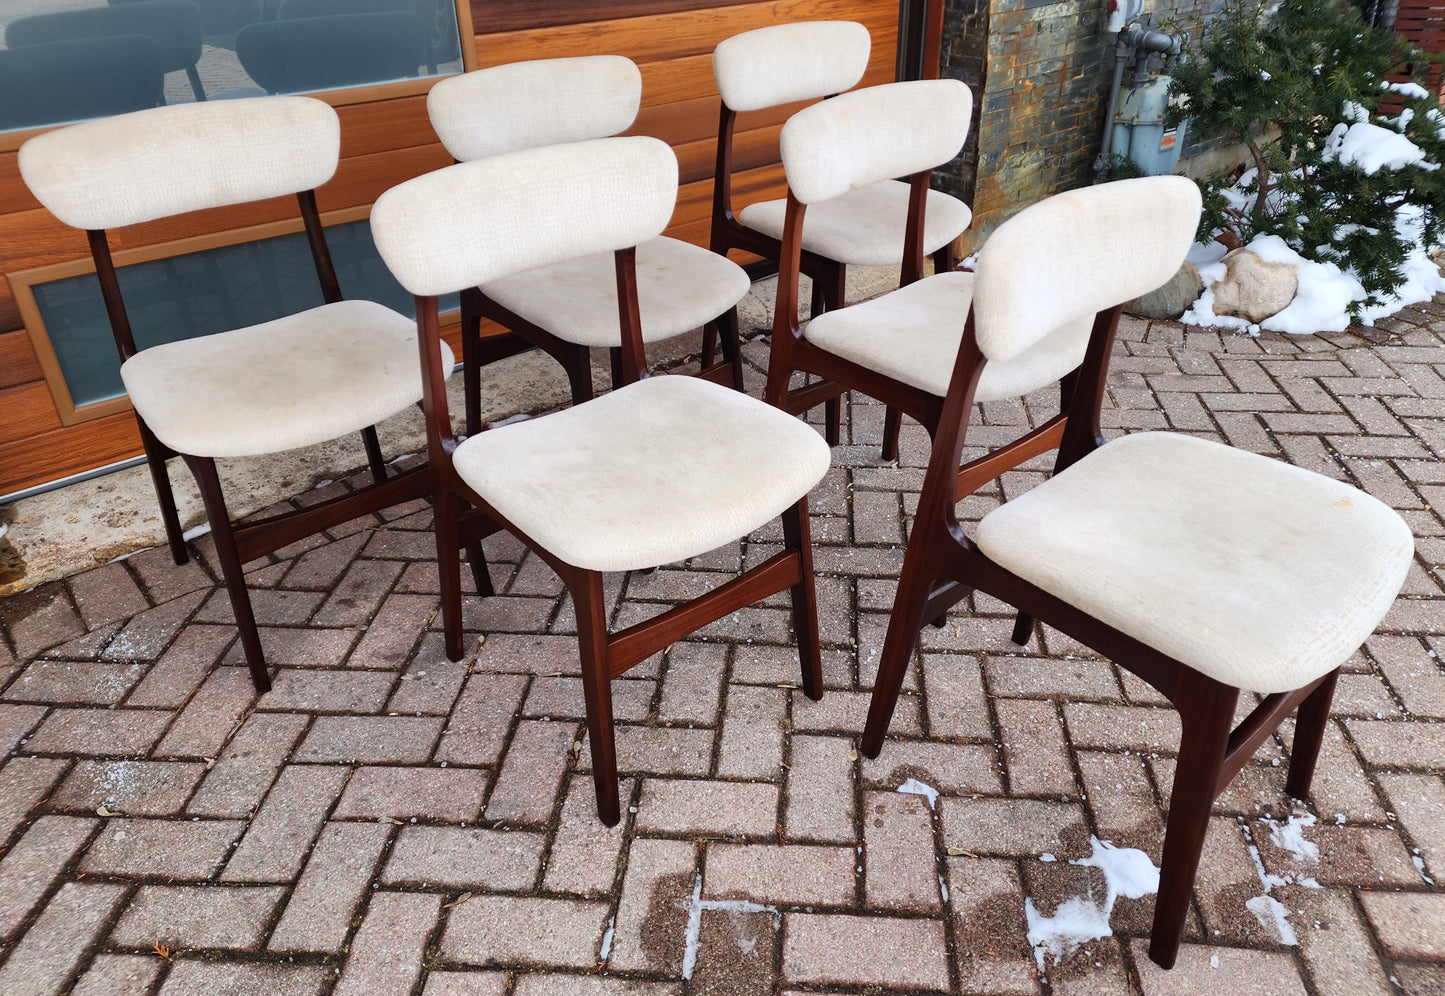 6 RESTORED Mid Century Modern Teak Chairs by R.Huber, will be Reupholstered